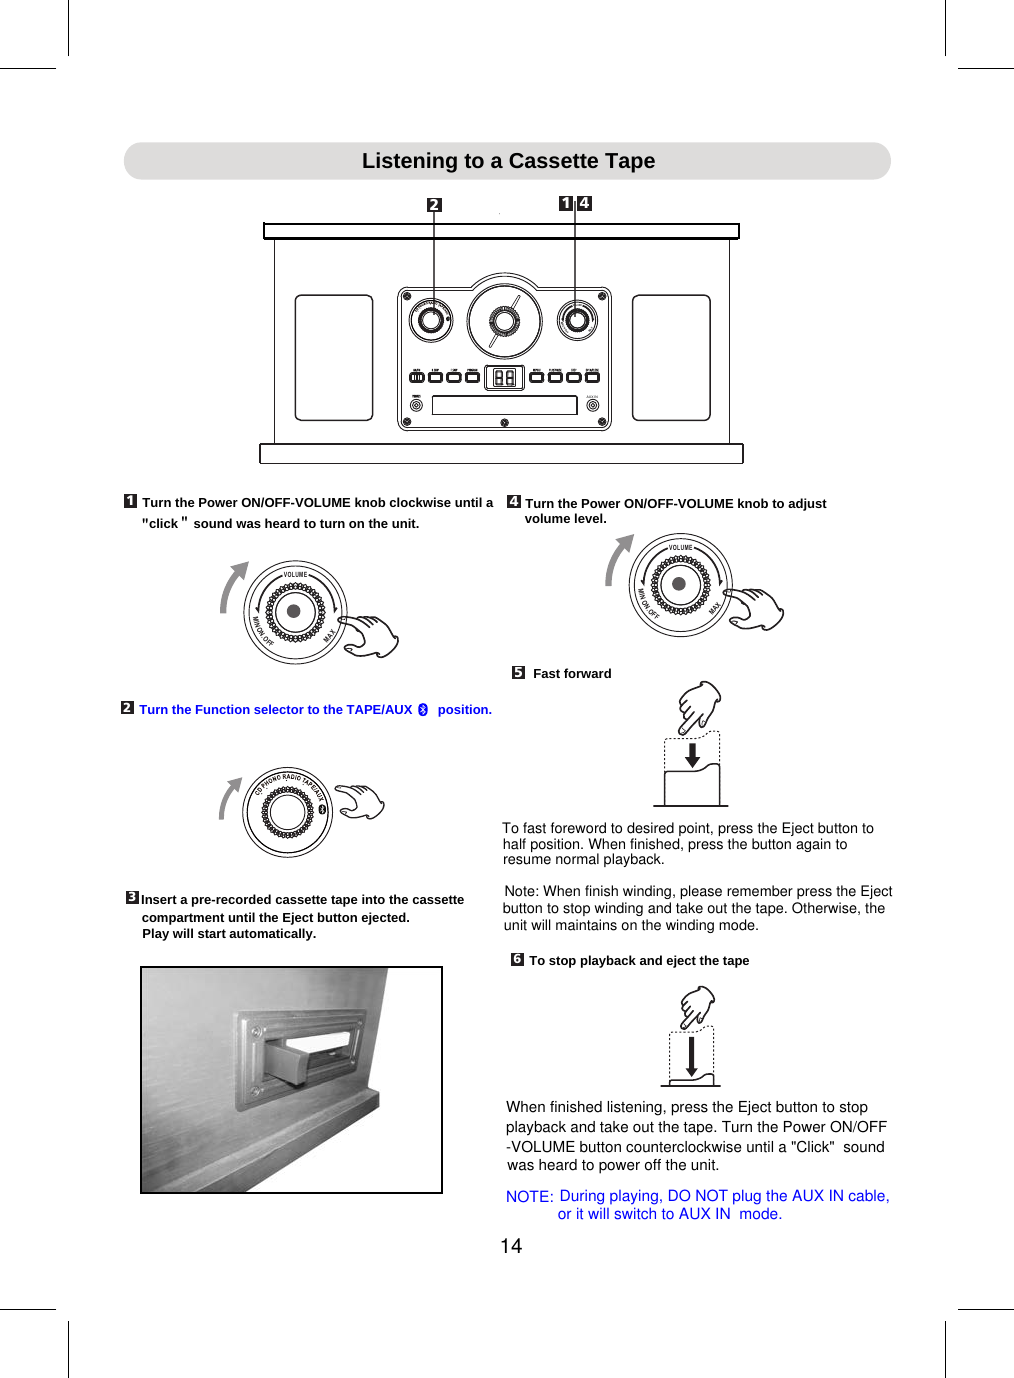 Page 15 of Junlan Electronic SRCD838BT Nostalgia 6 in 1 Turntable Radio User Manual                     1